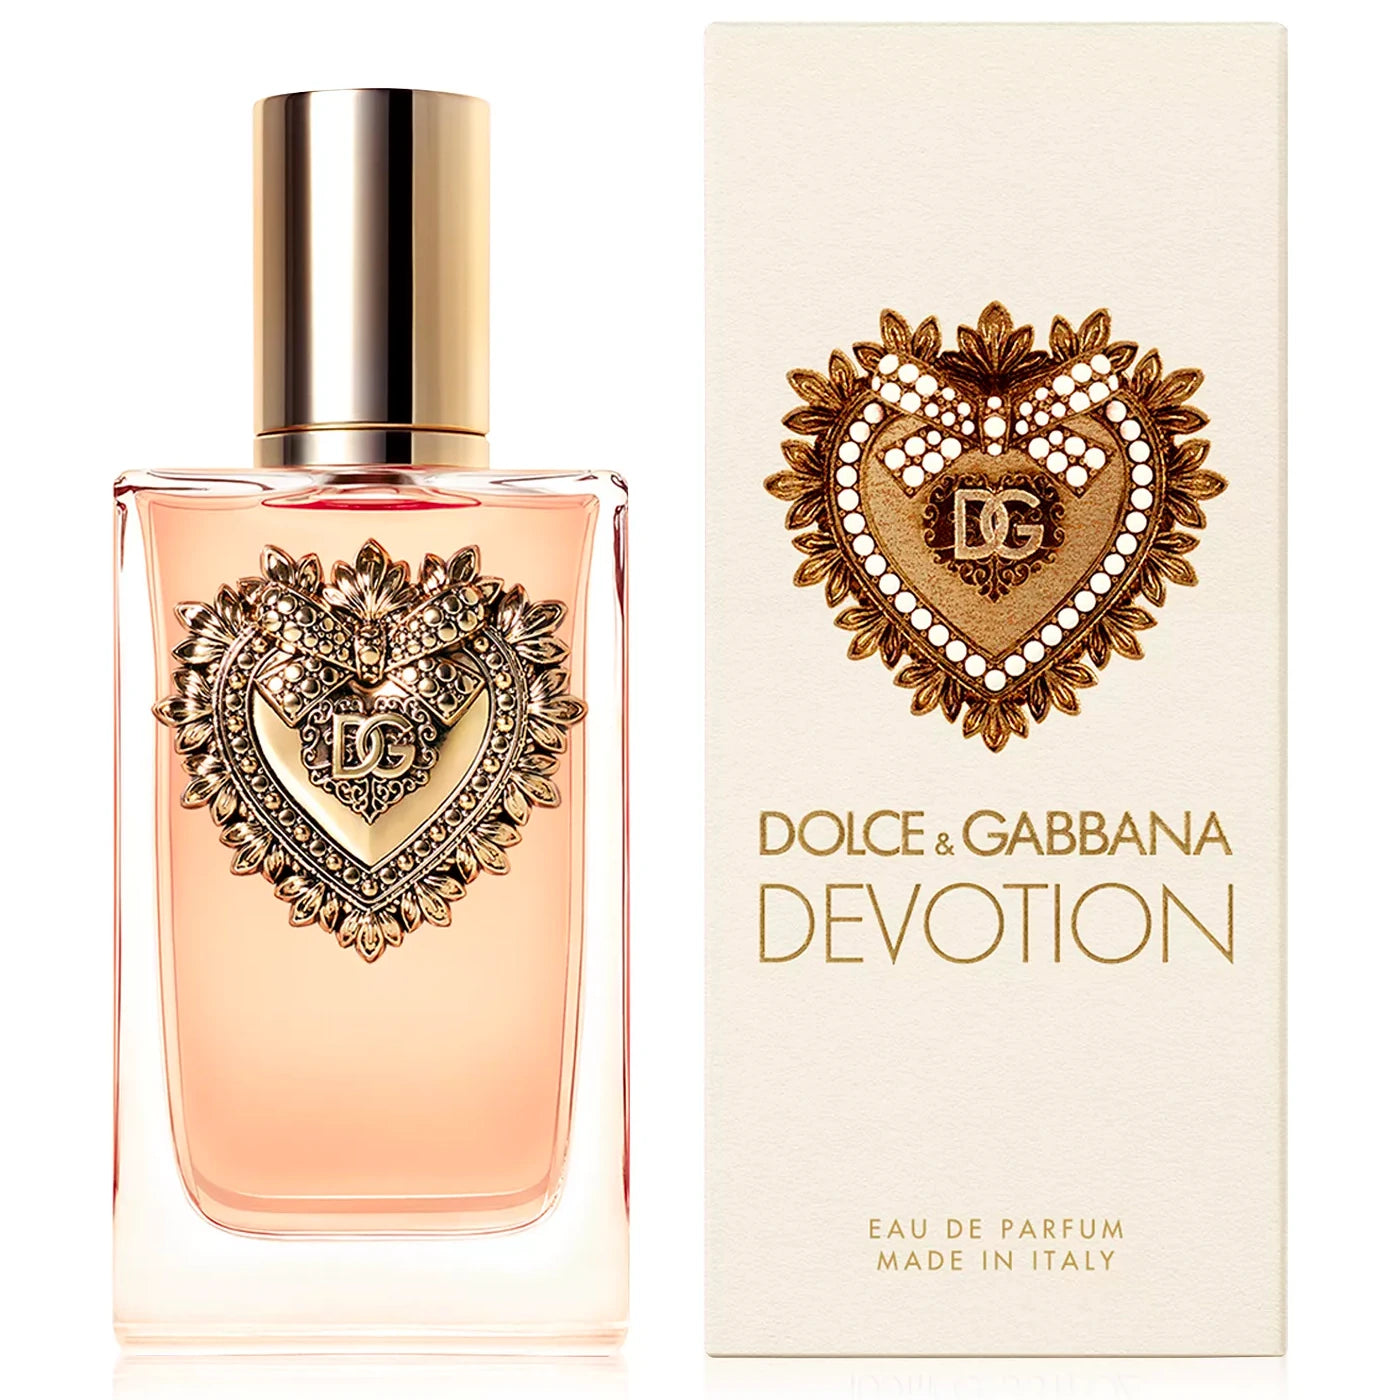 <p class="c-small-font c-margin-bottom-2v description" data-auto="product-description" data-mce-fragment="1" itemprop="description"><meta charset="utf-8"><span>This luxurious and exclusive scent from Dolce &amp; Gabbana captures the timeless beauty and allure of femininity. Experience tantalizing top notes of candied citrus, a heart note of sweet orange blossom, and a base note of luxurious vanilla. Devotion Eau de Parfum offers long-lasting allure and comes in a travel size, perfect for the modern, sophisticated woman on the go.</span></p>